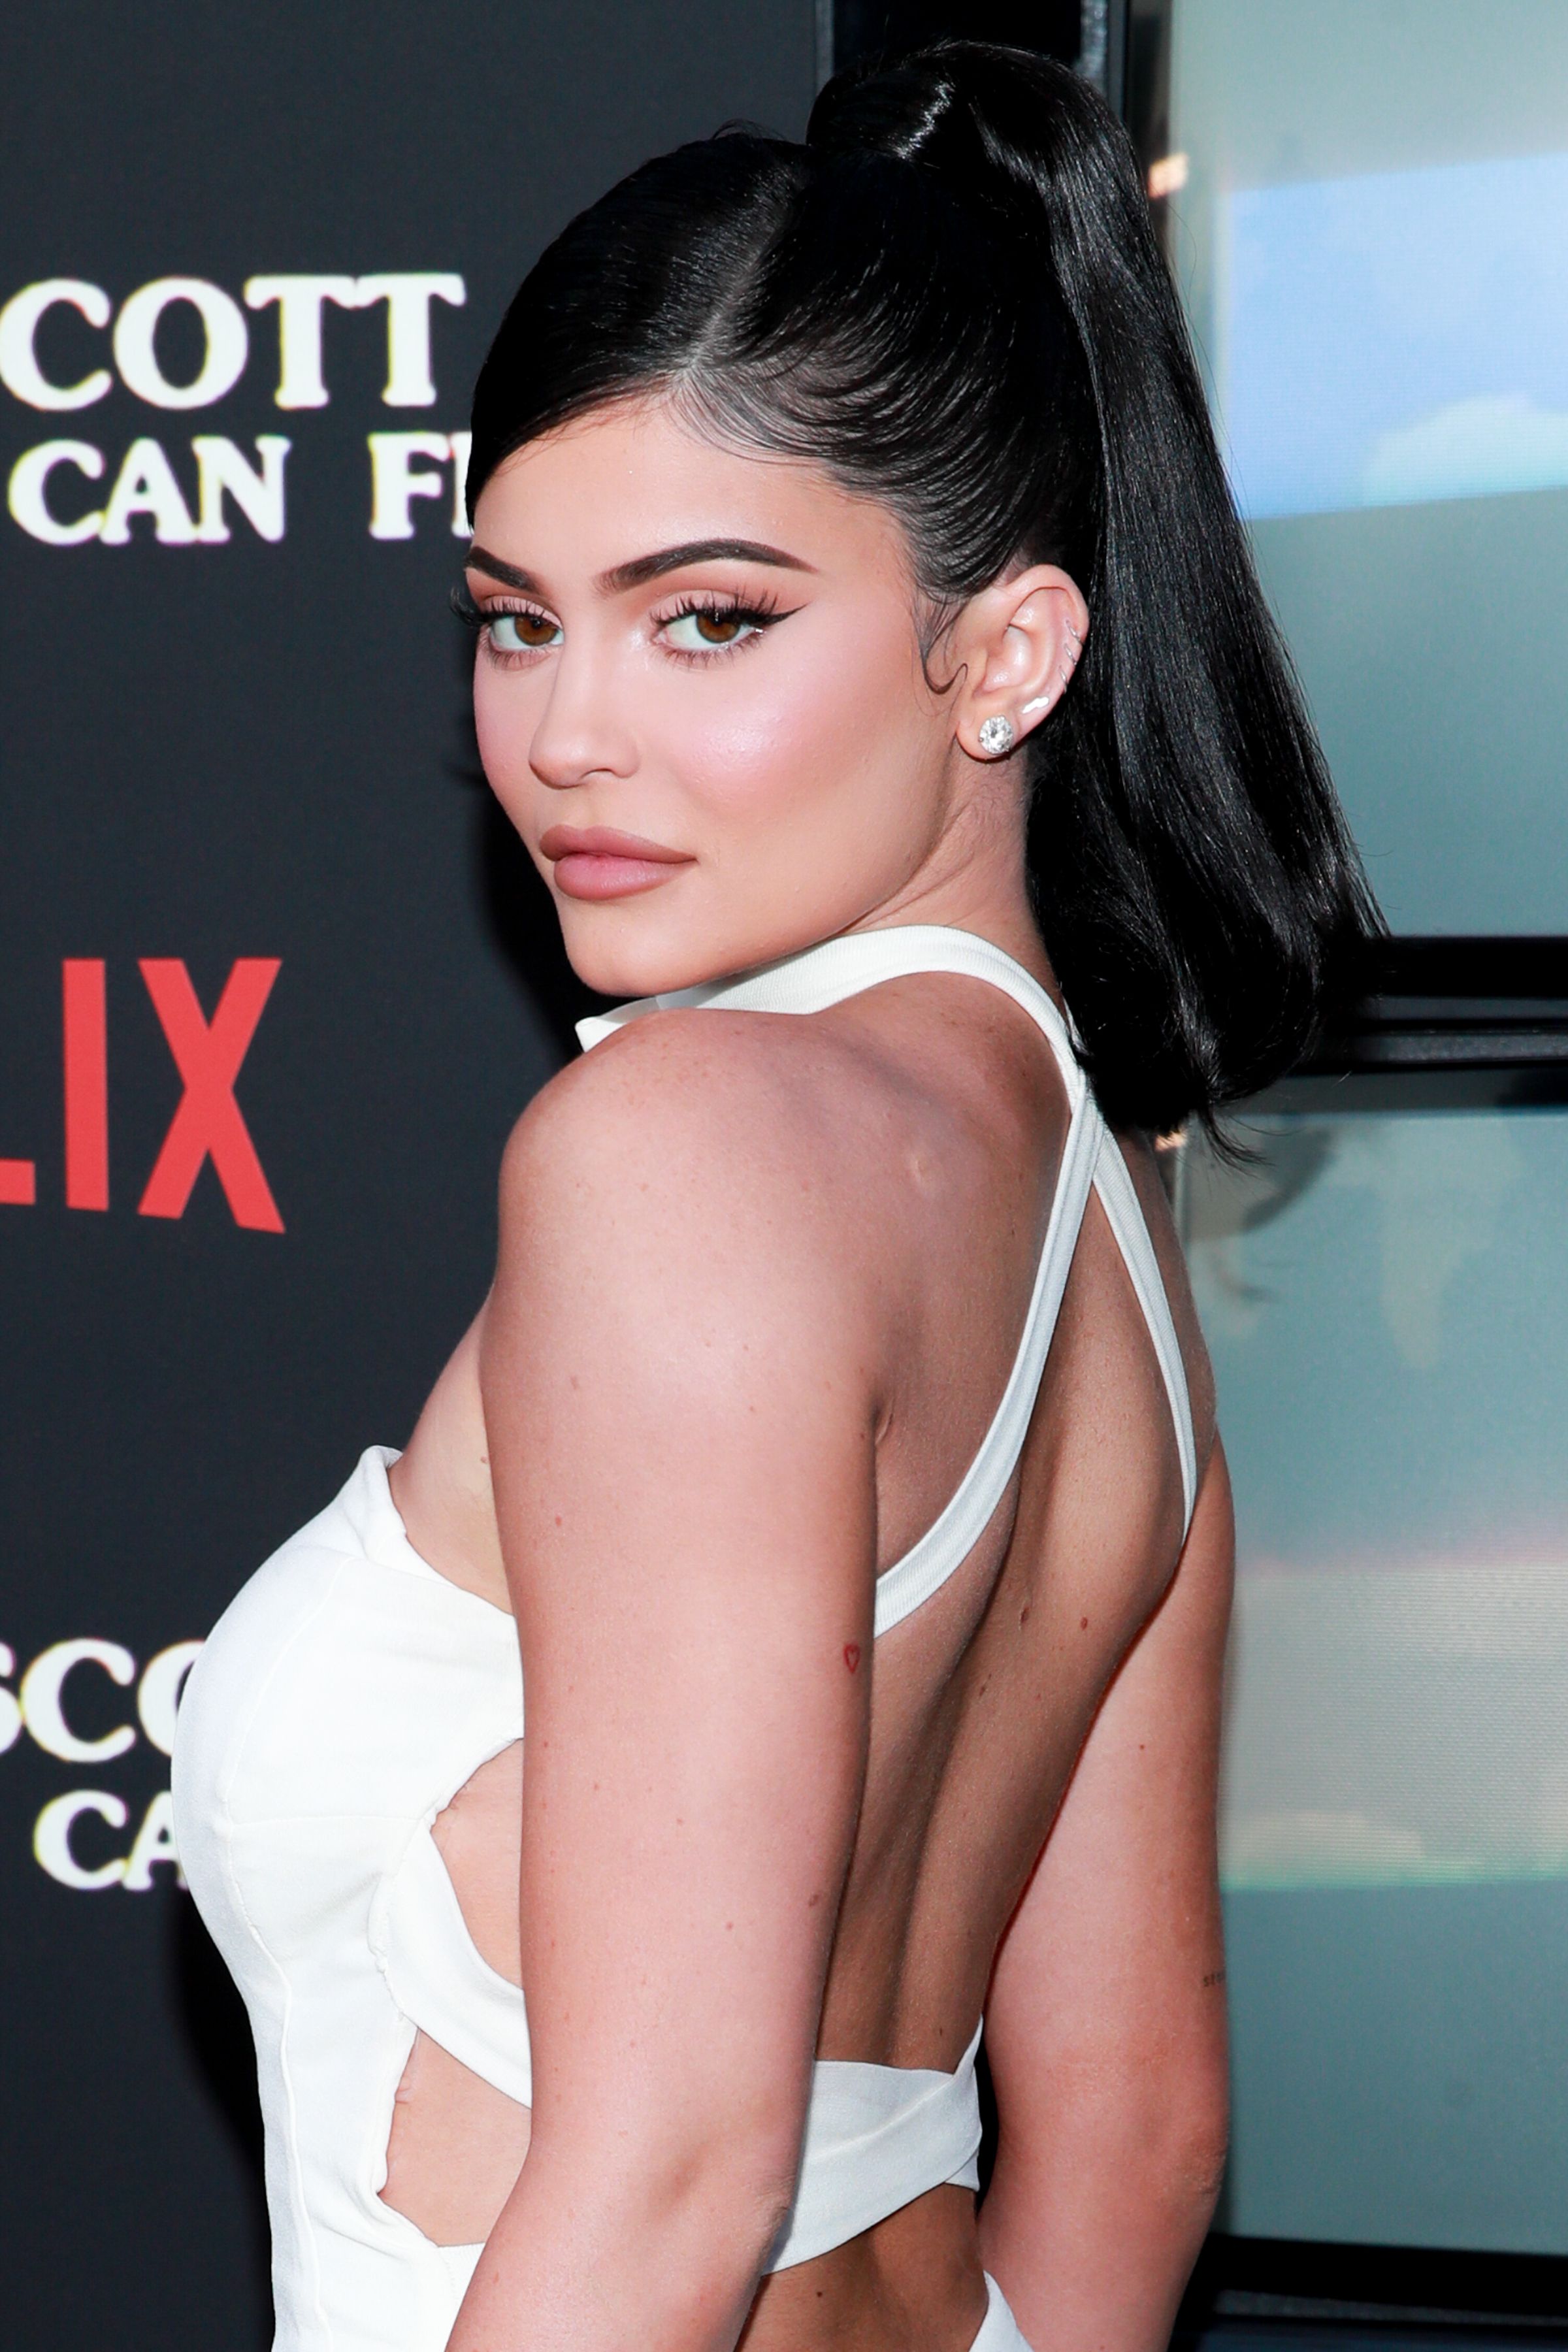 Kylie Jenner at the premiere of "Travis Scott: Look Mom I Can Fly" at Barker Hangar on August 27, 2019 in Santa Monica, California. | Source: Getty Images